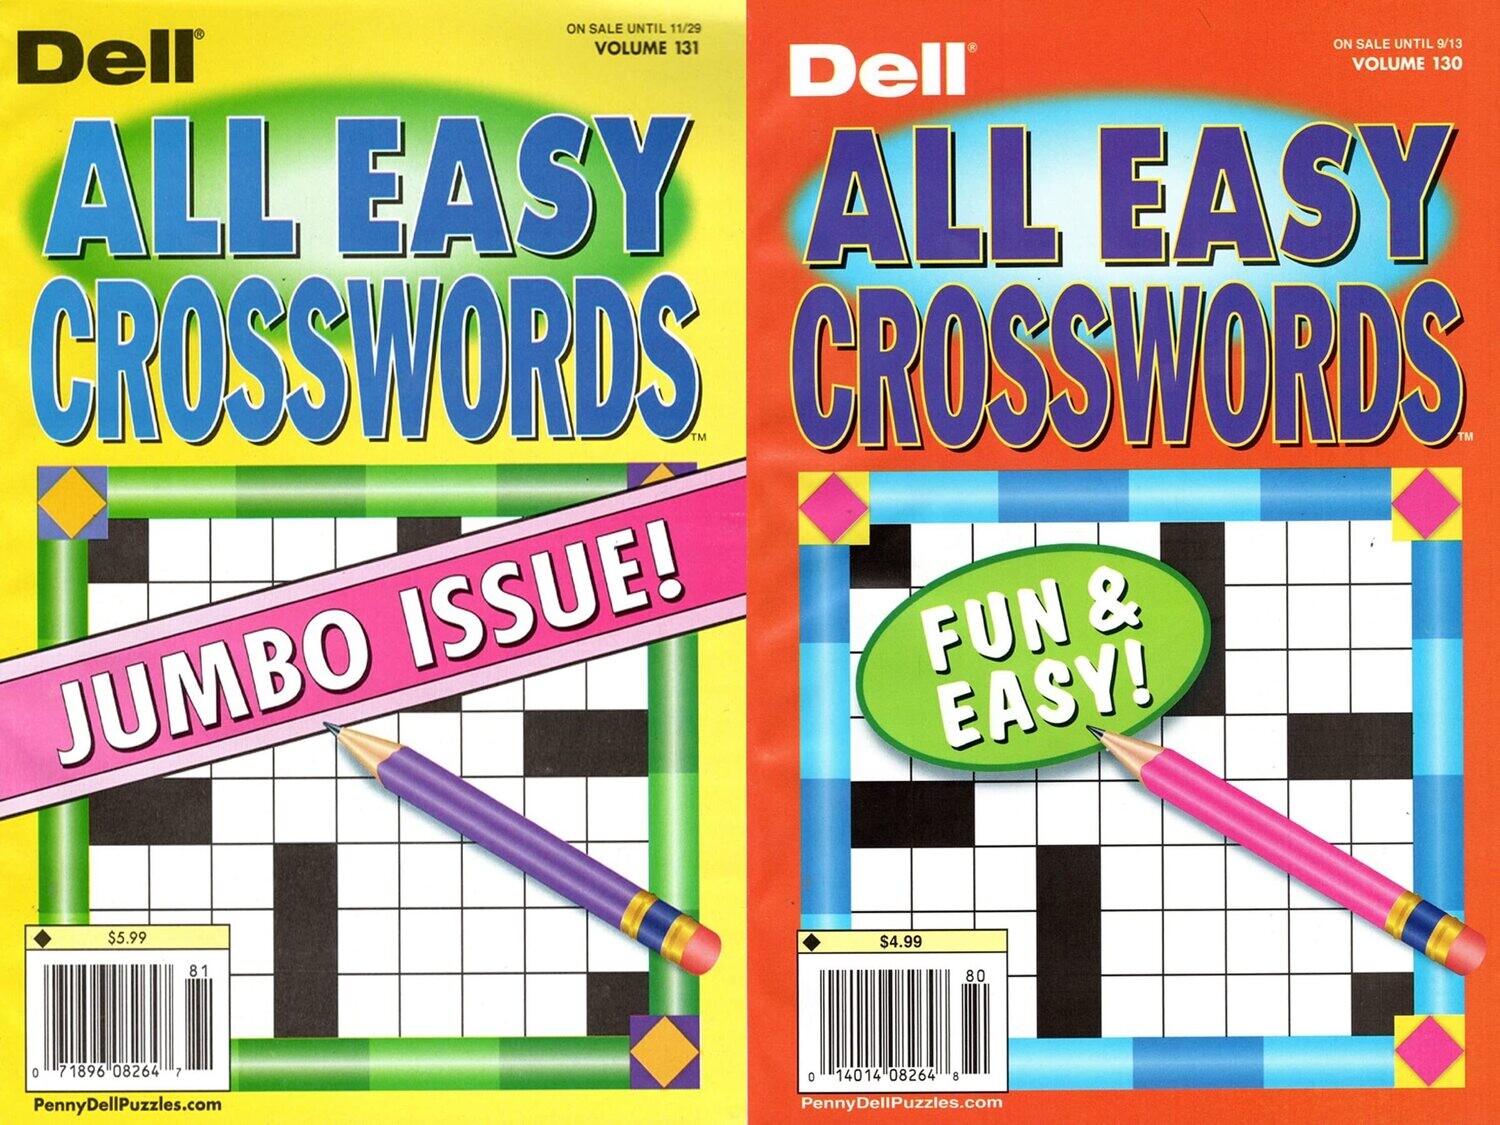 Pack of 2 Dell All Easy Crossword Puzzle Books -Free Shipping!